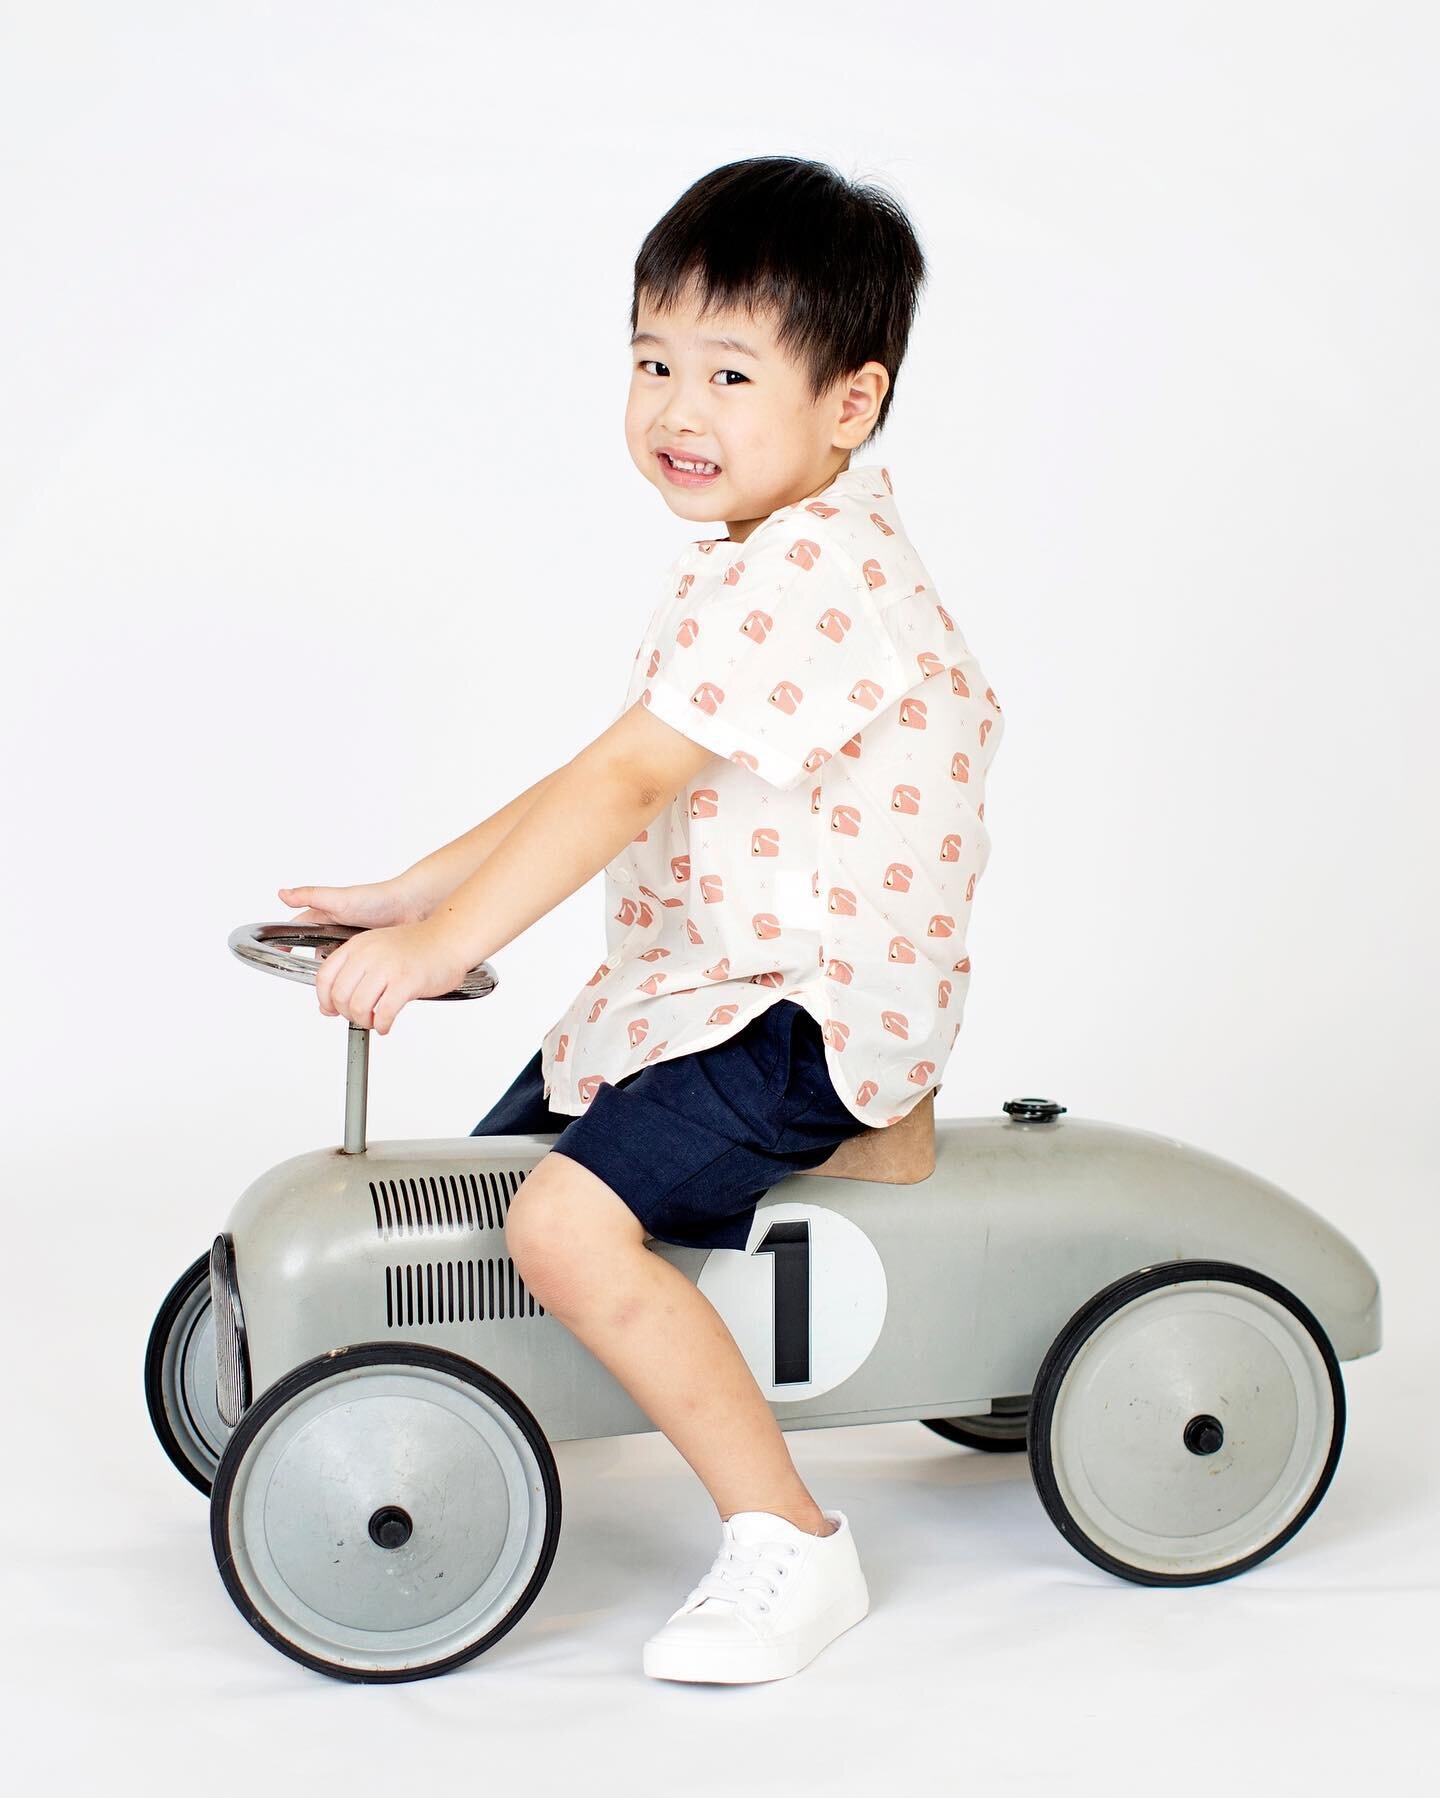 What's your choice of transportation this weekend? 🏎️⁠
⁠
⁠
#ChildrenOfLuna #kids #baby #love #family #kidsfashion #fashion #fun #cute #babygirl #kidsofinstagram #happy #babyboy #photography #babies #instakids #momlife #parenting #photooftheday #mom 